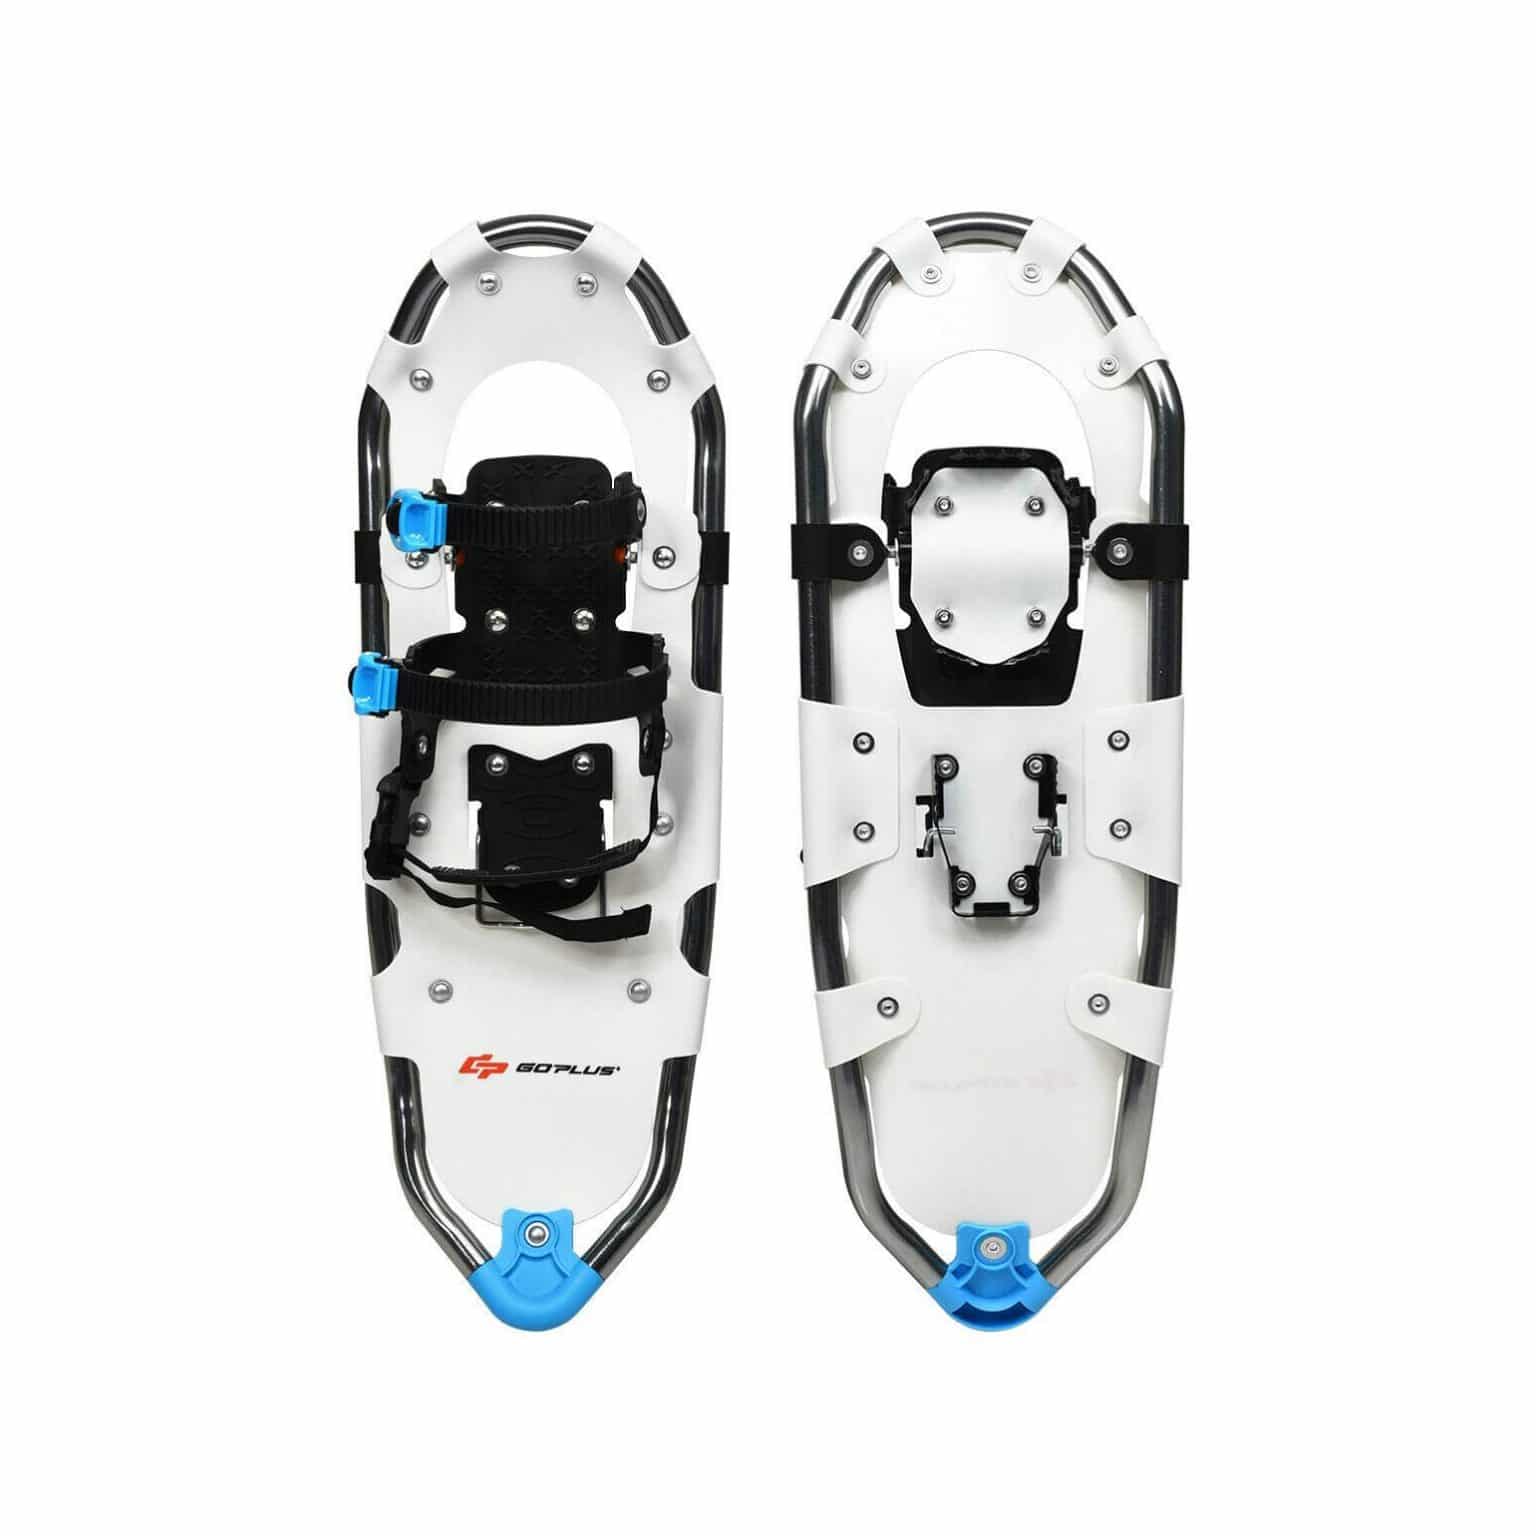 snowshoes rating review